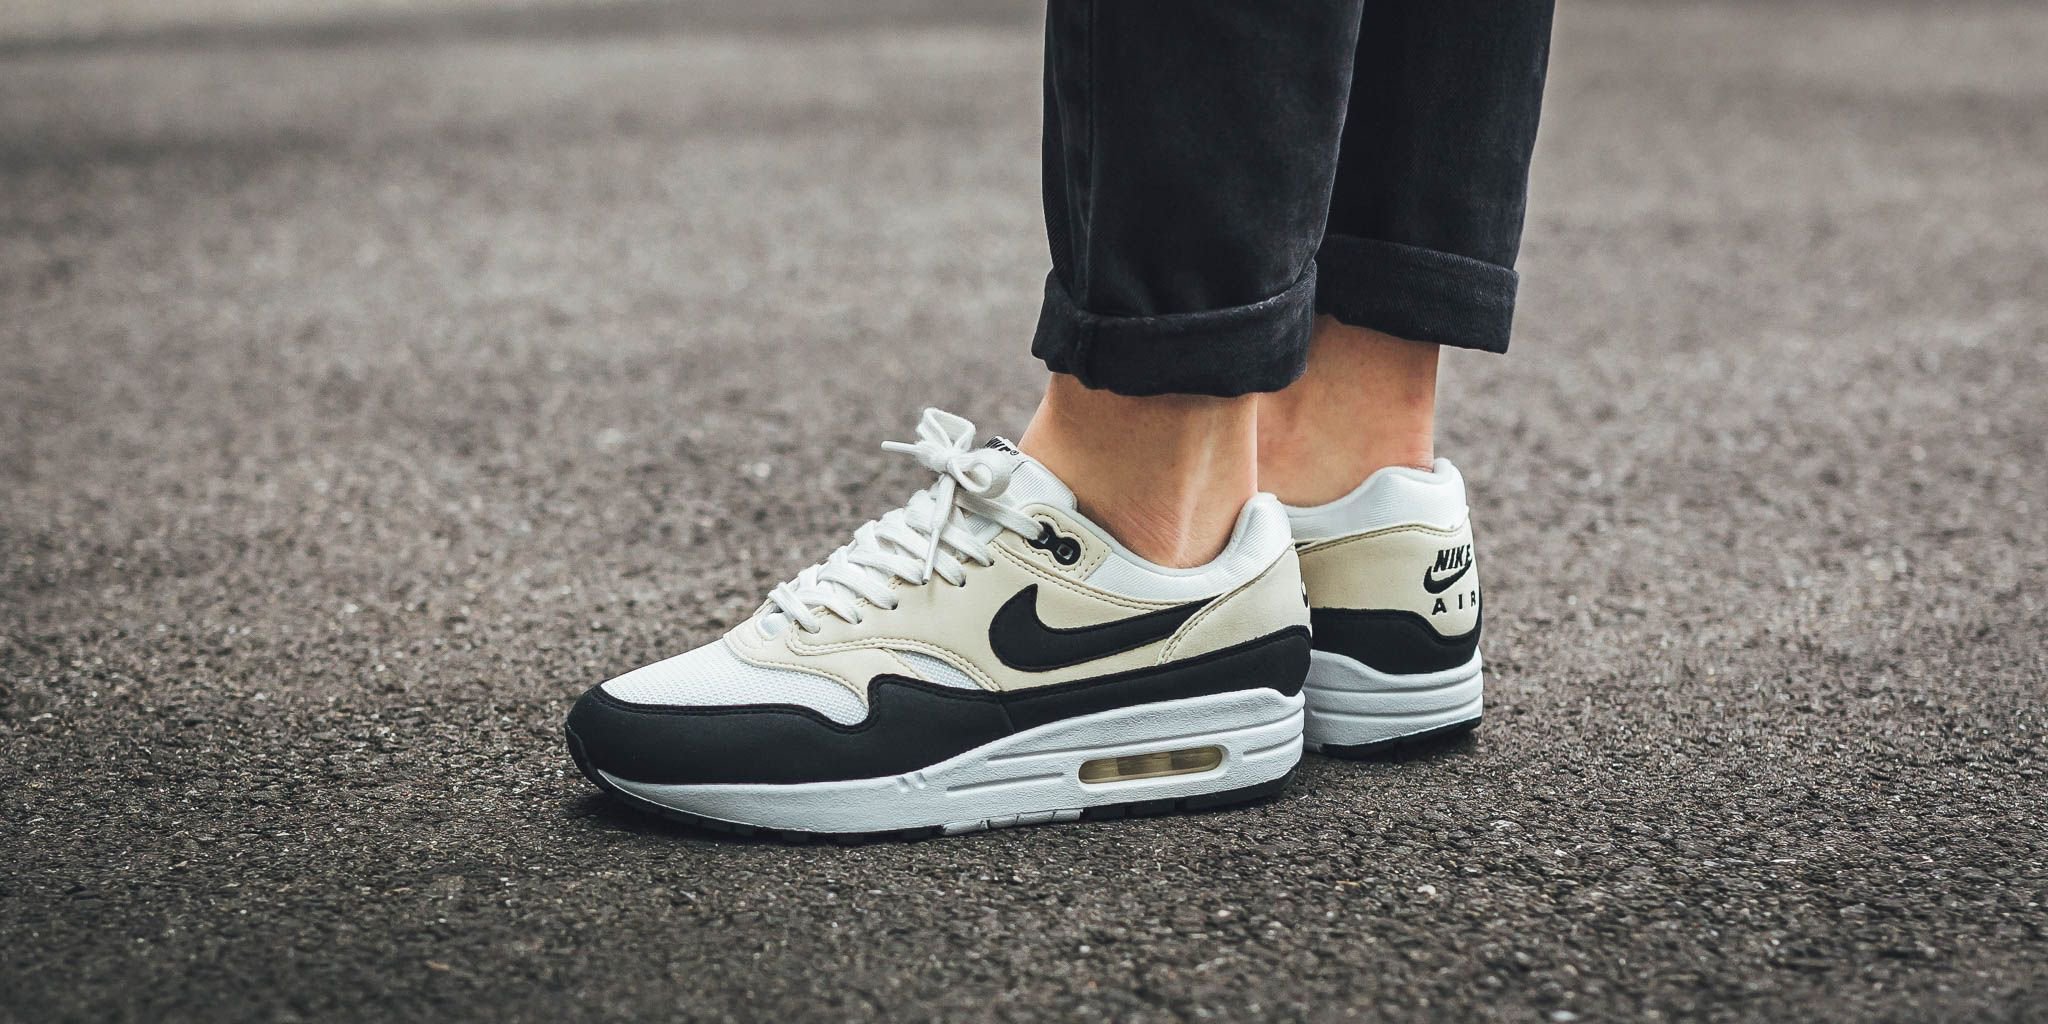 muerte Ligadura insuficiente Titolo on Twitter: "NIKE Wmns Air Max 1 "White/Obsidian" / "Sail/Black- Fossil" / "White/Dark Stucco" and "Vast Grey/Particle Rose" RELEASE  🔹Monday, 12th March 🔹9AM CET L I N K ➡️➡️➡️ https://t.co/3wEKlku28N #nike  #airmax1 #